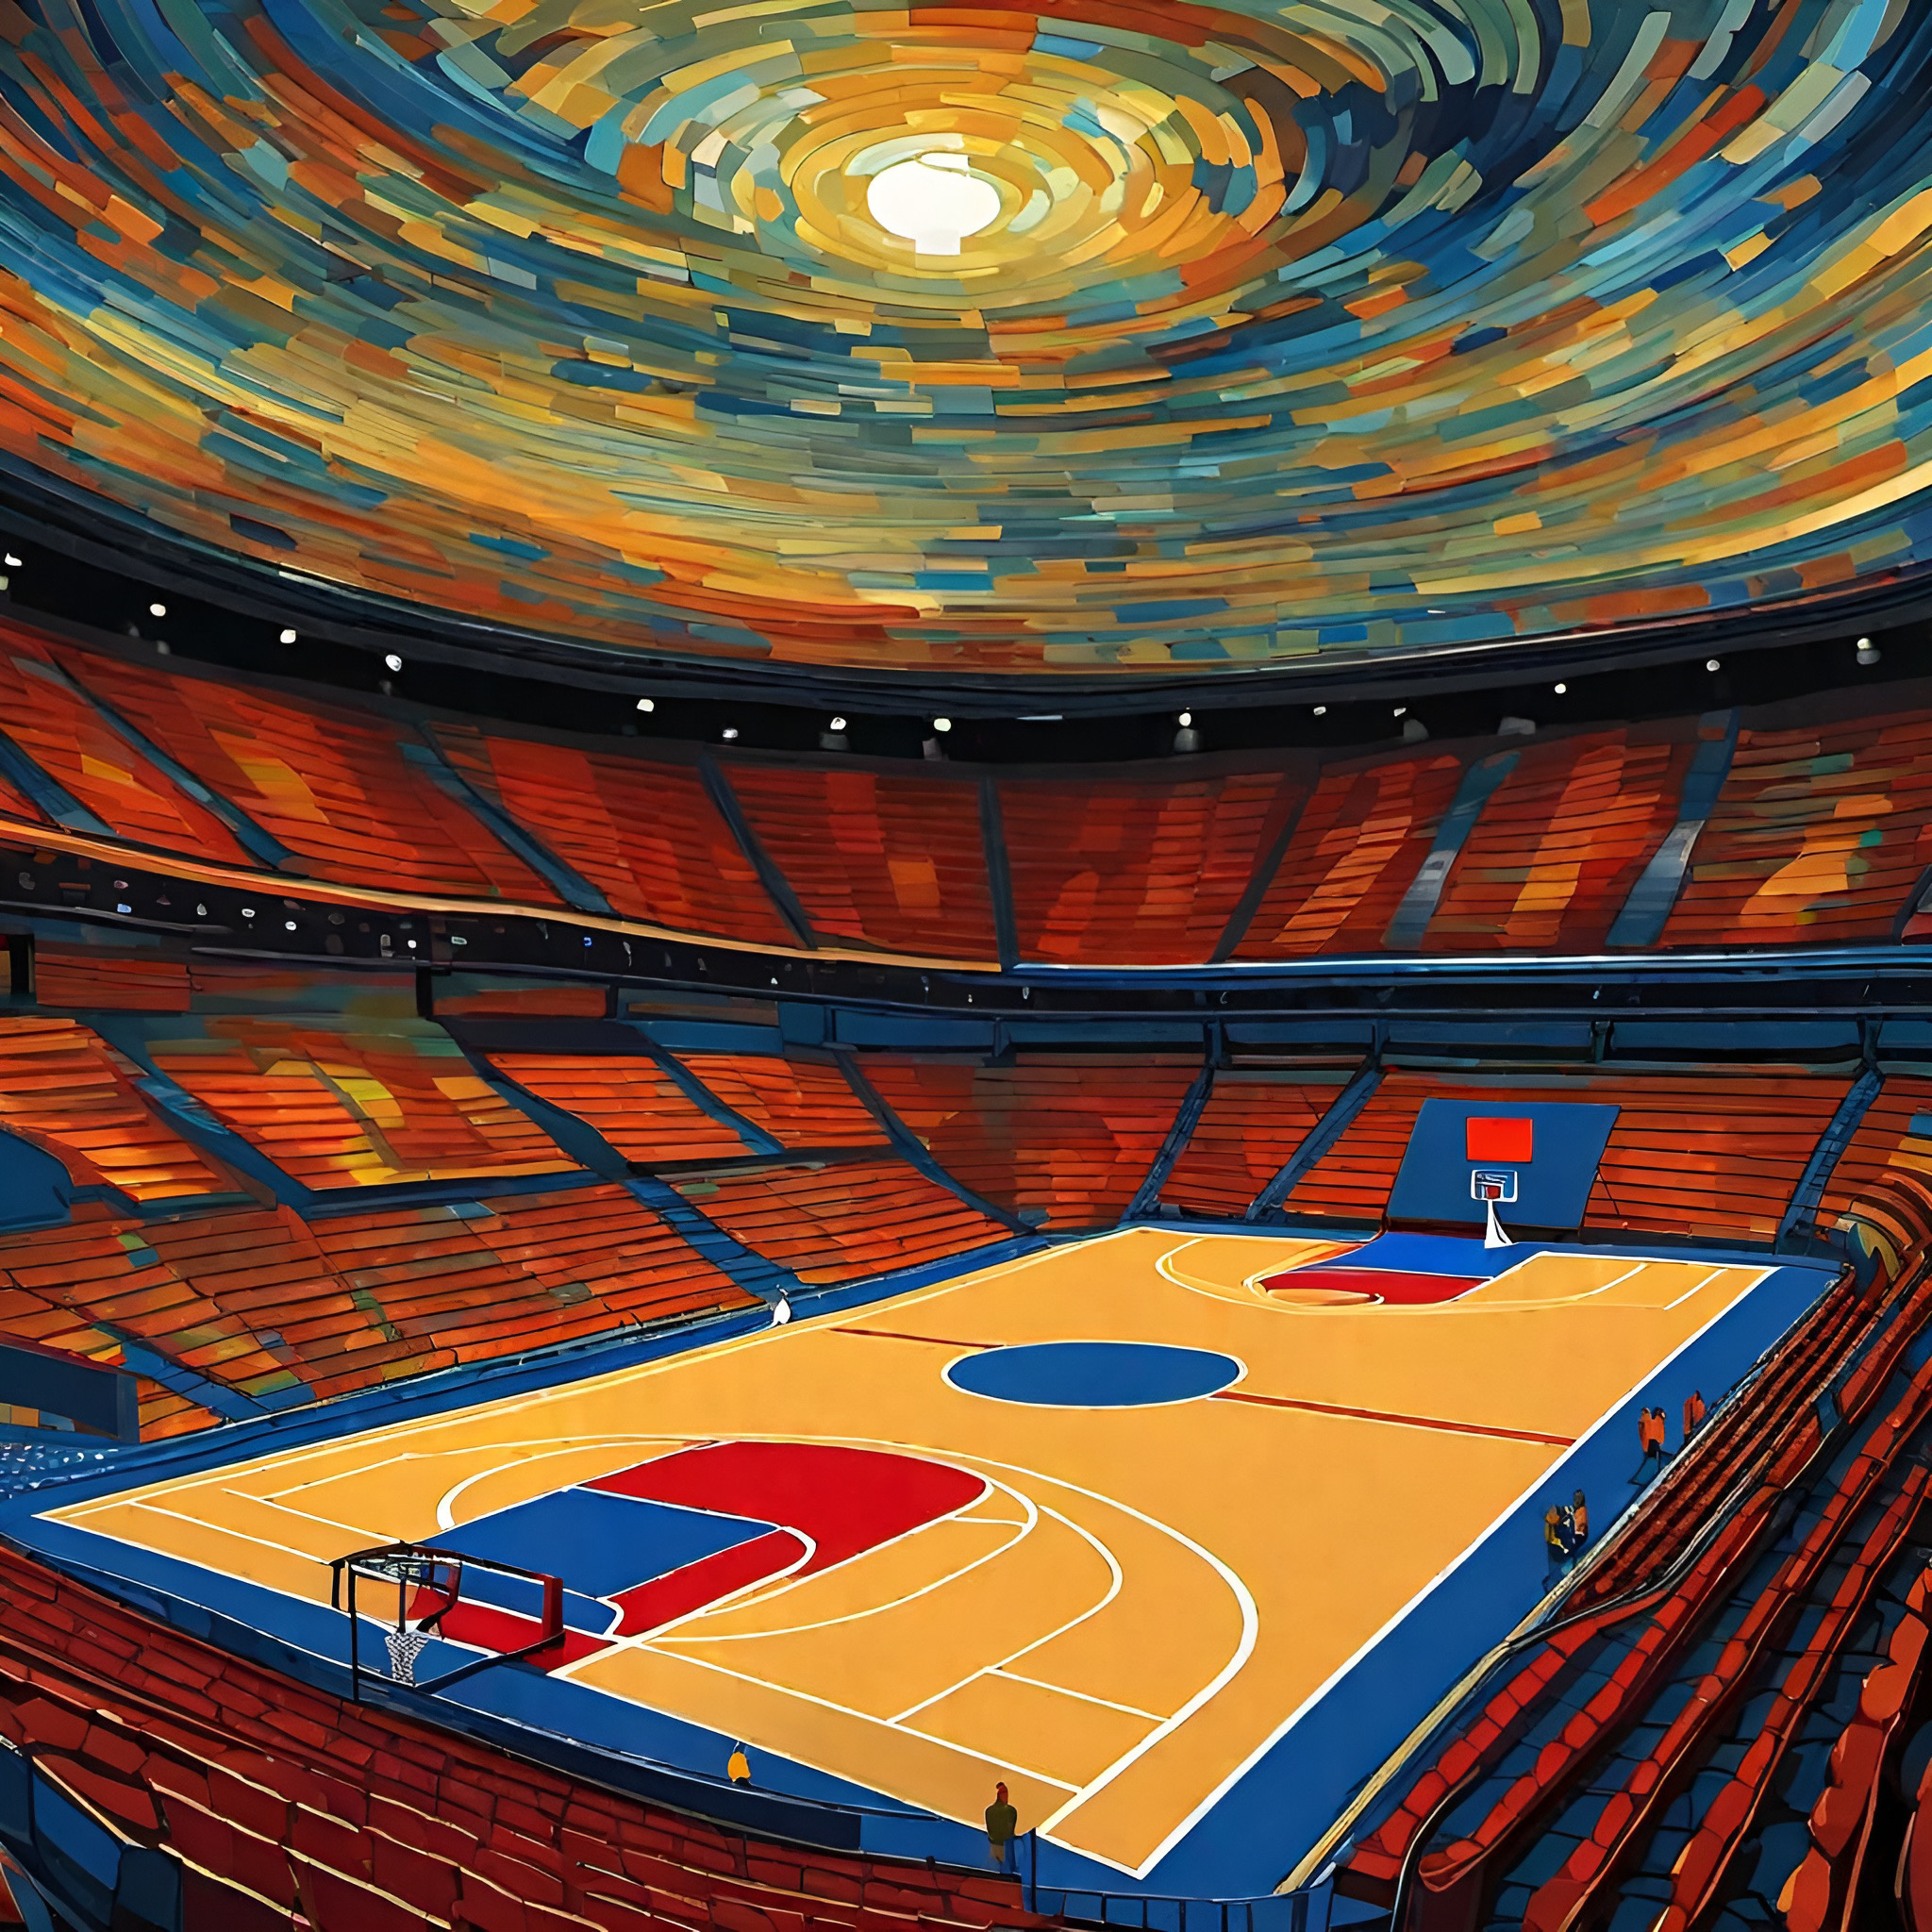 Famous College Basketball Venues